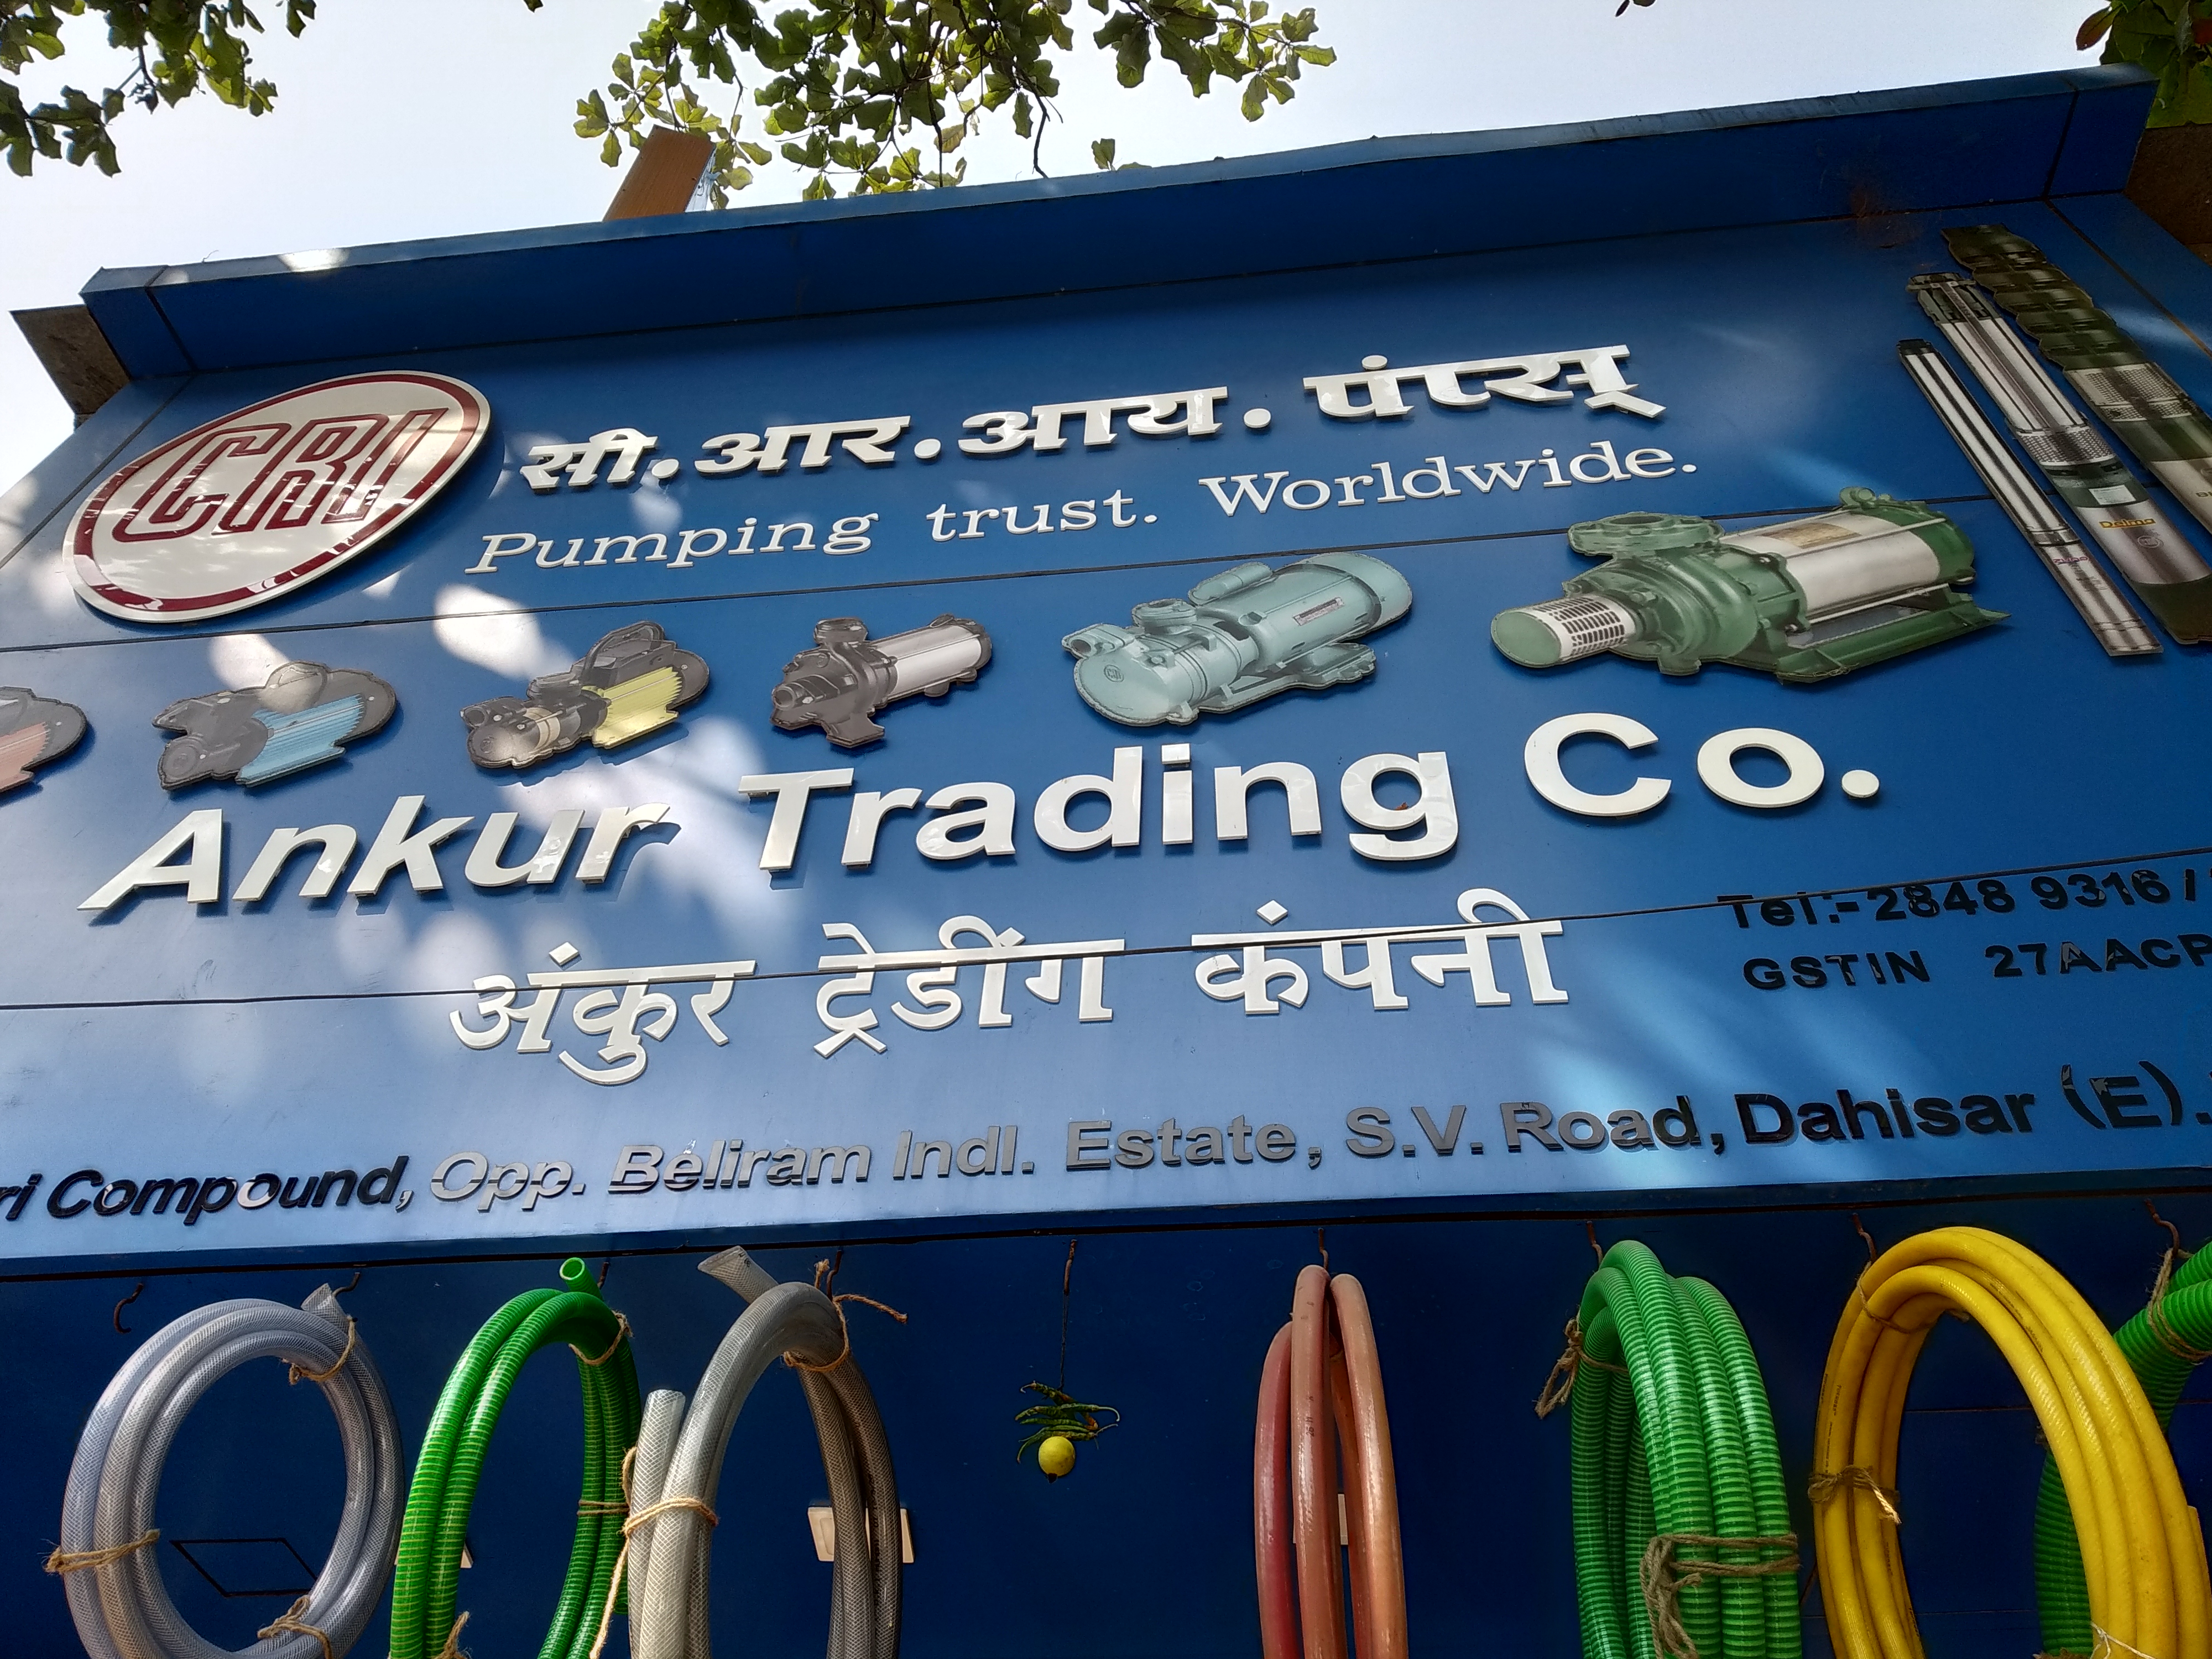 Ankur Trading Co - authorised dealer for grundfos pump